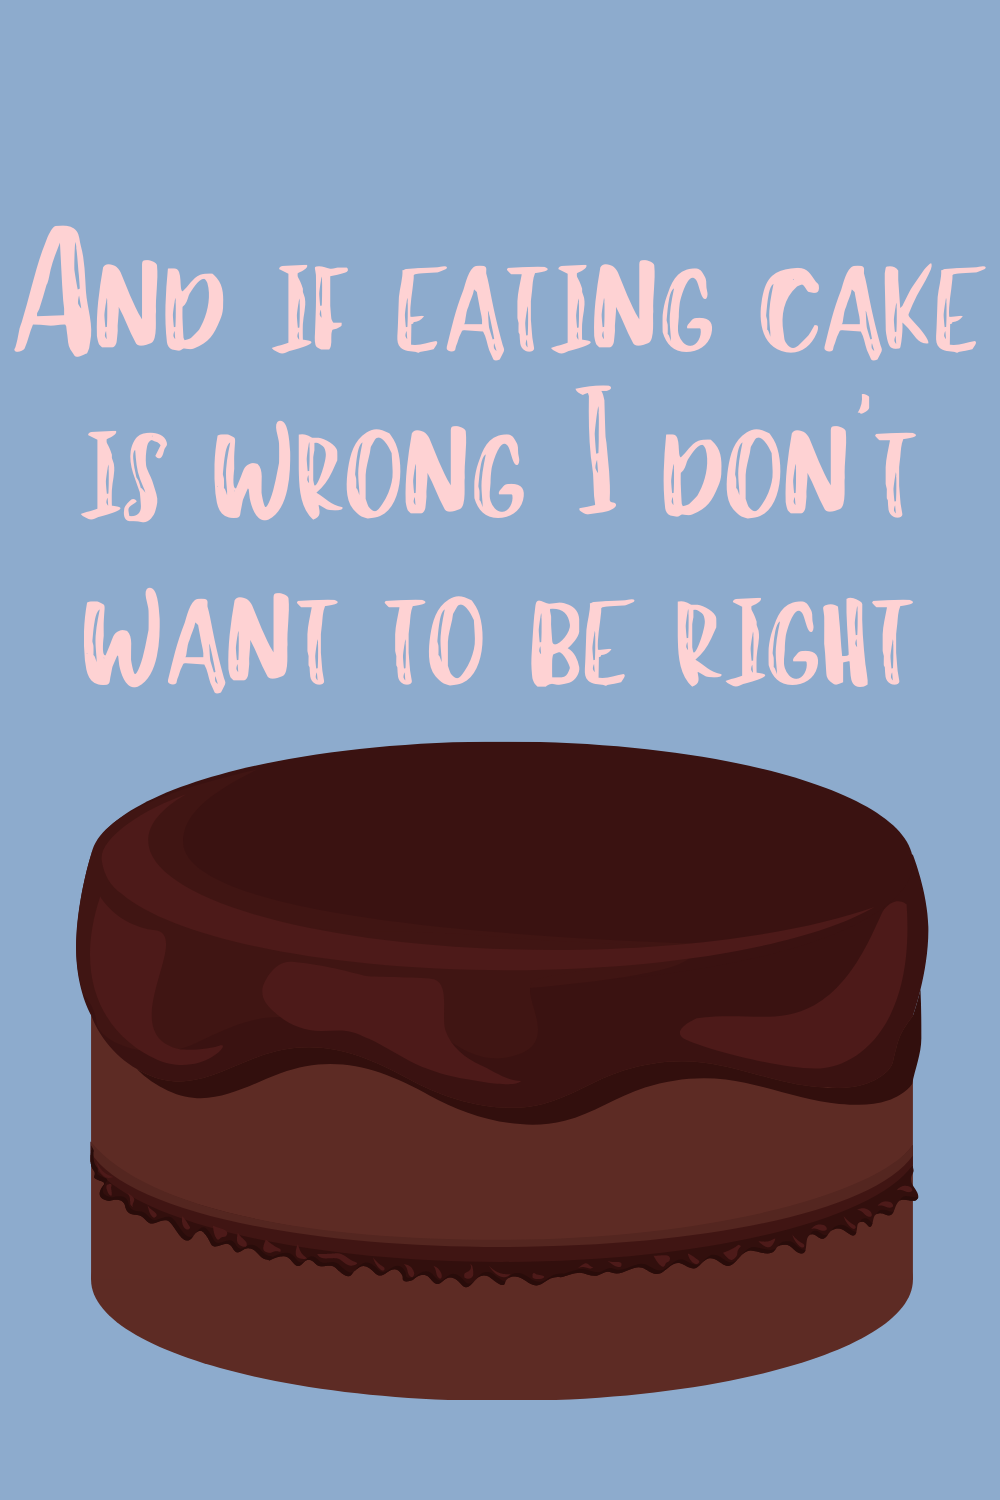 Classic Gilmore Girls Quotes that are Always True